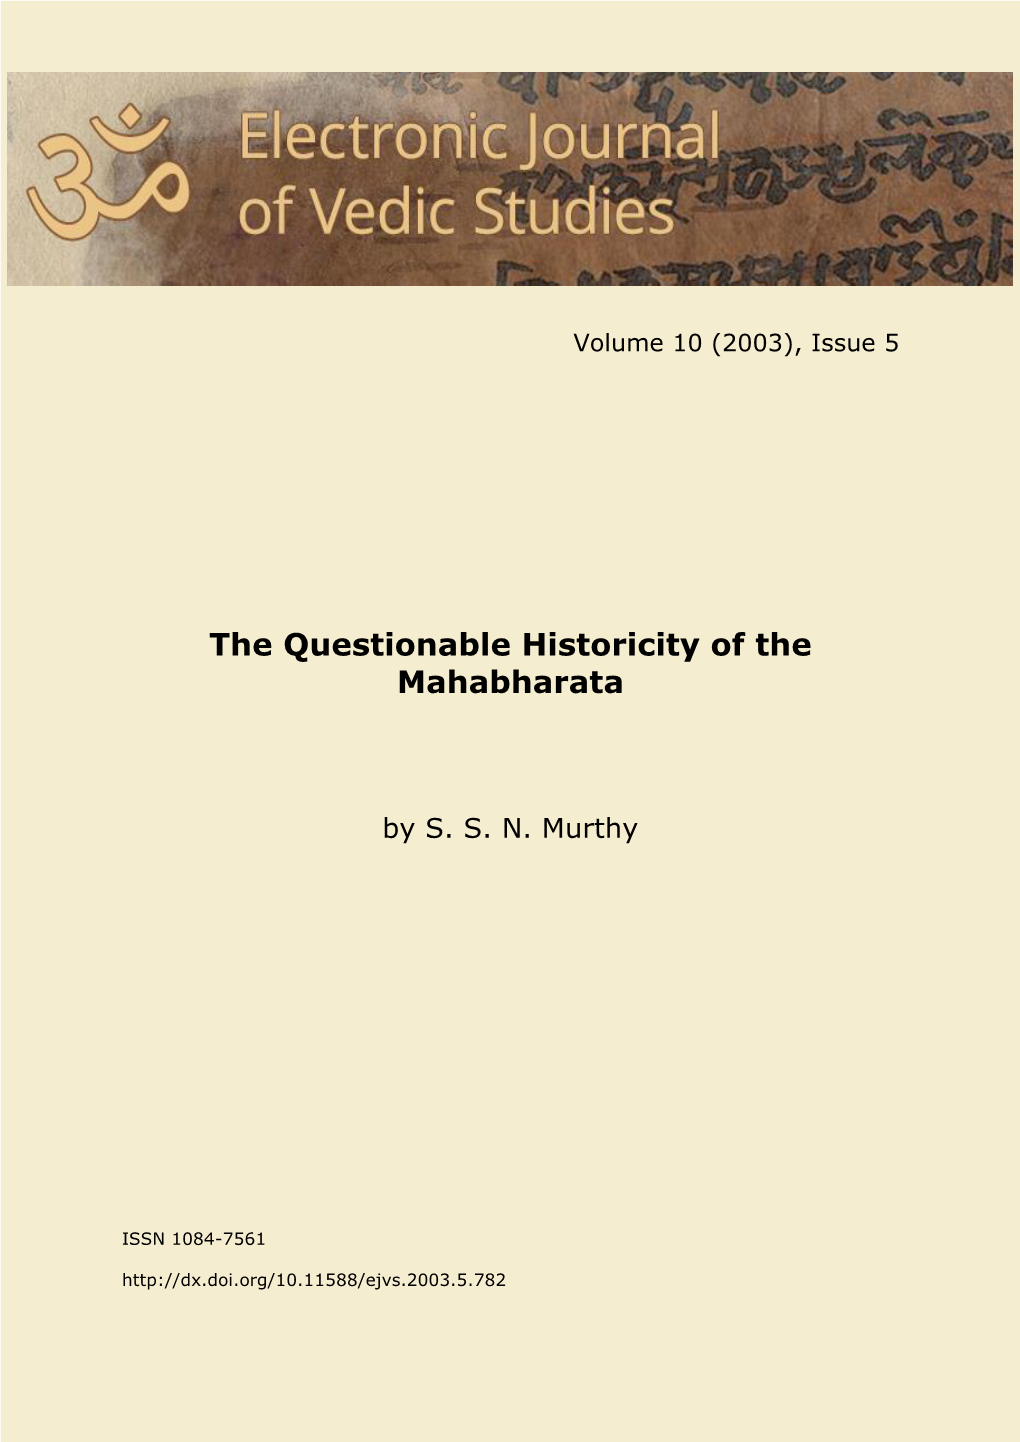 The Questionable Historicity of the Mahabharata